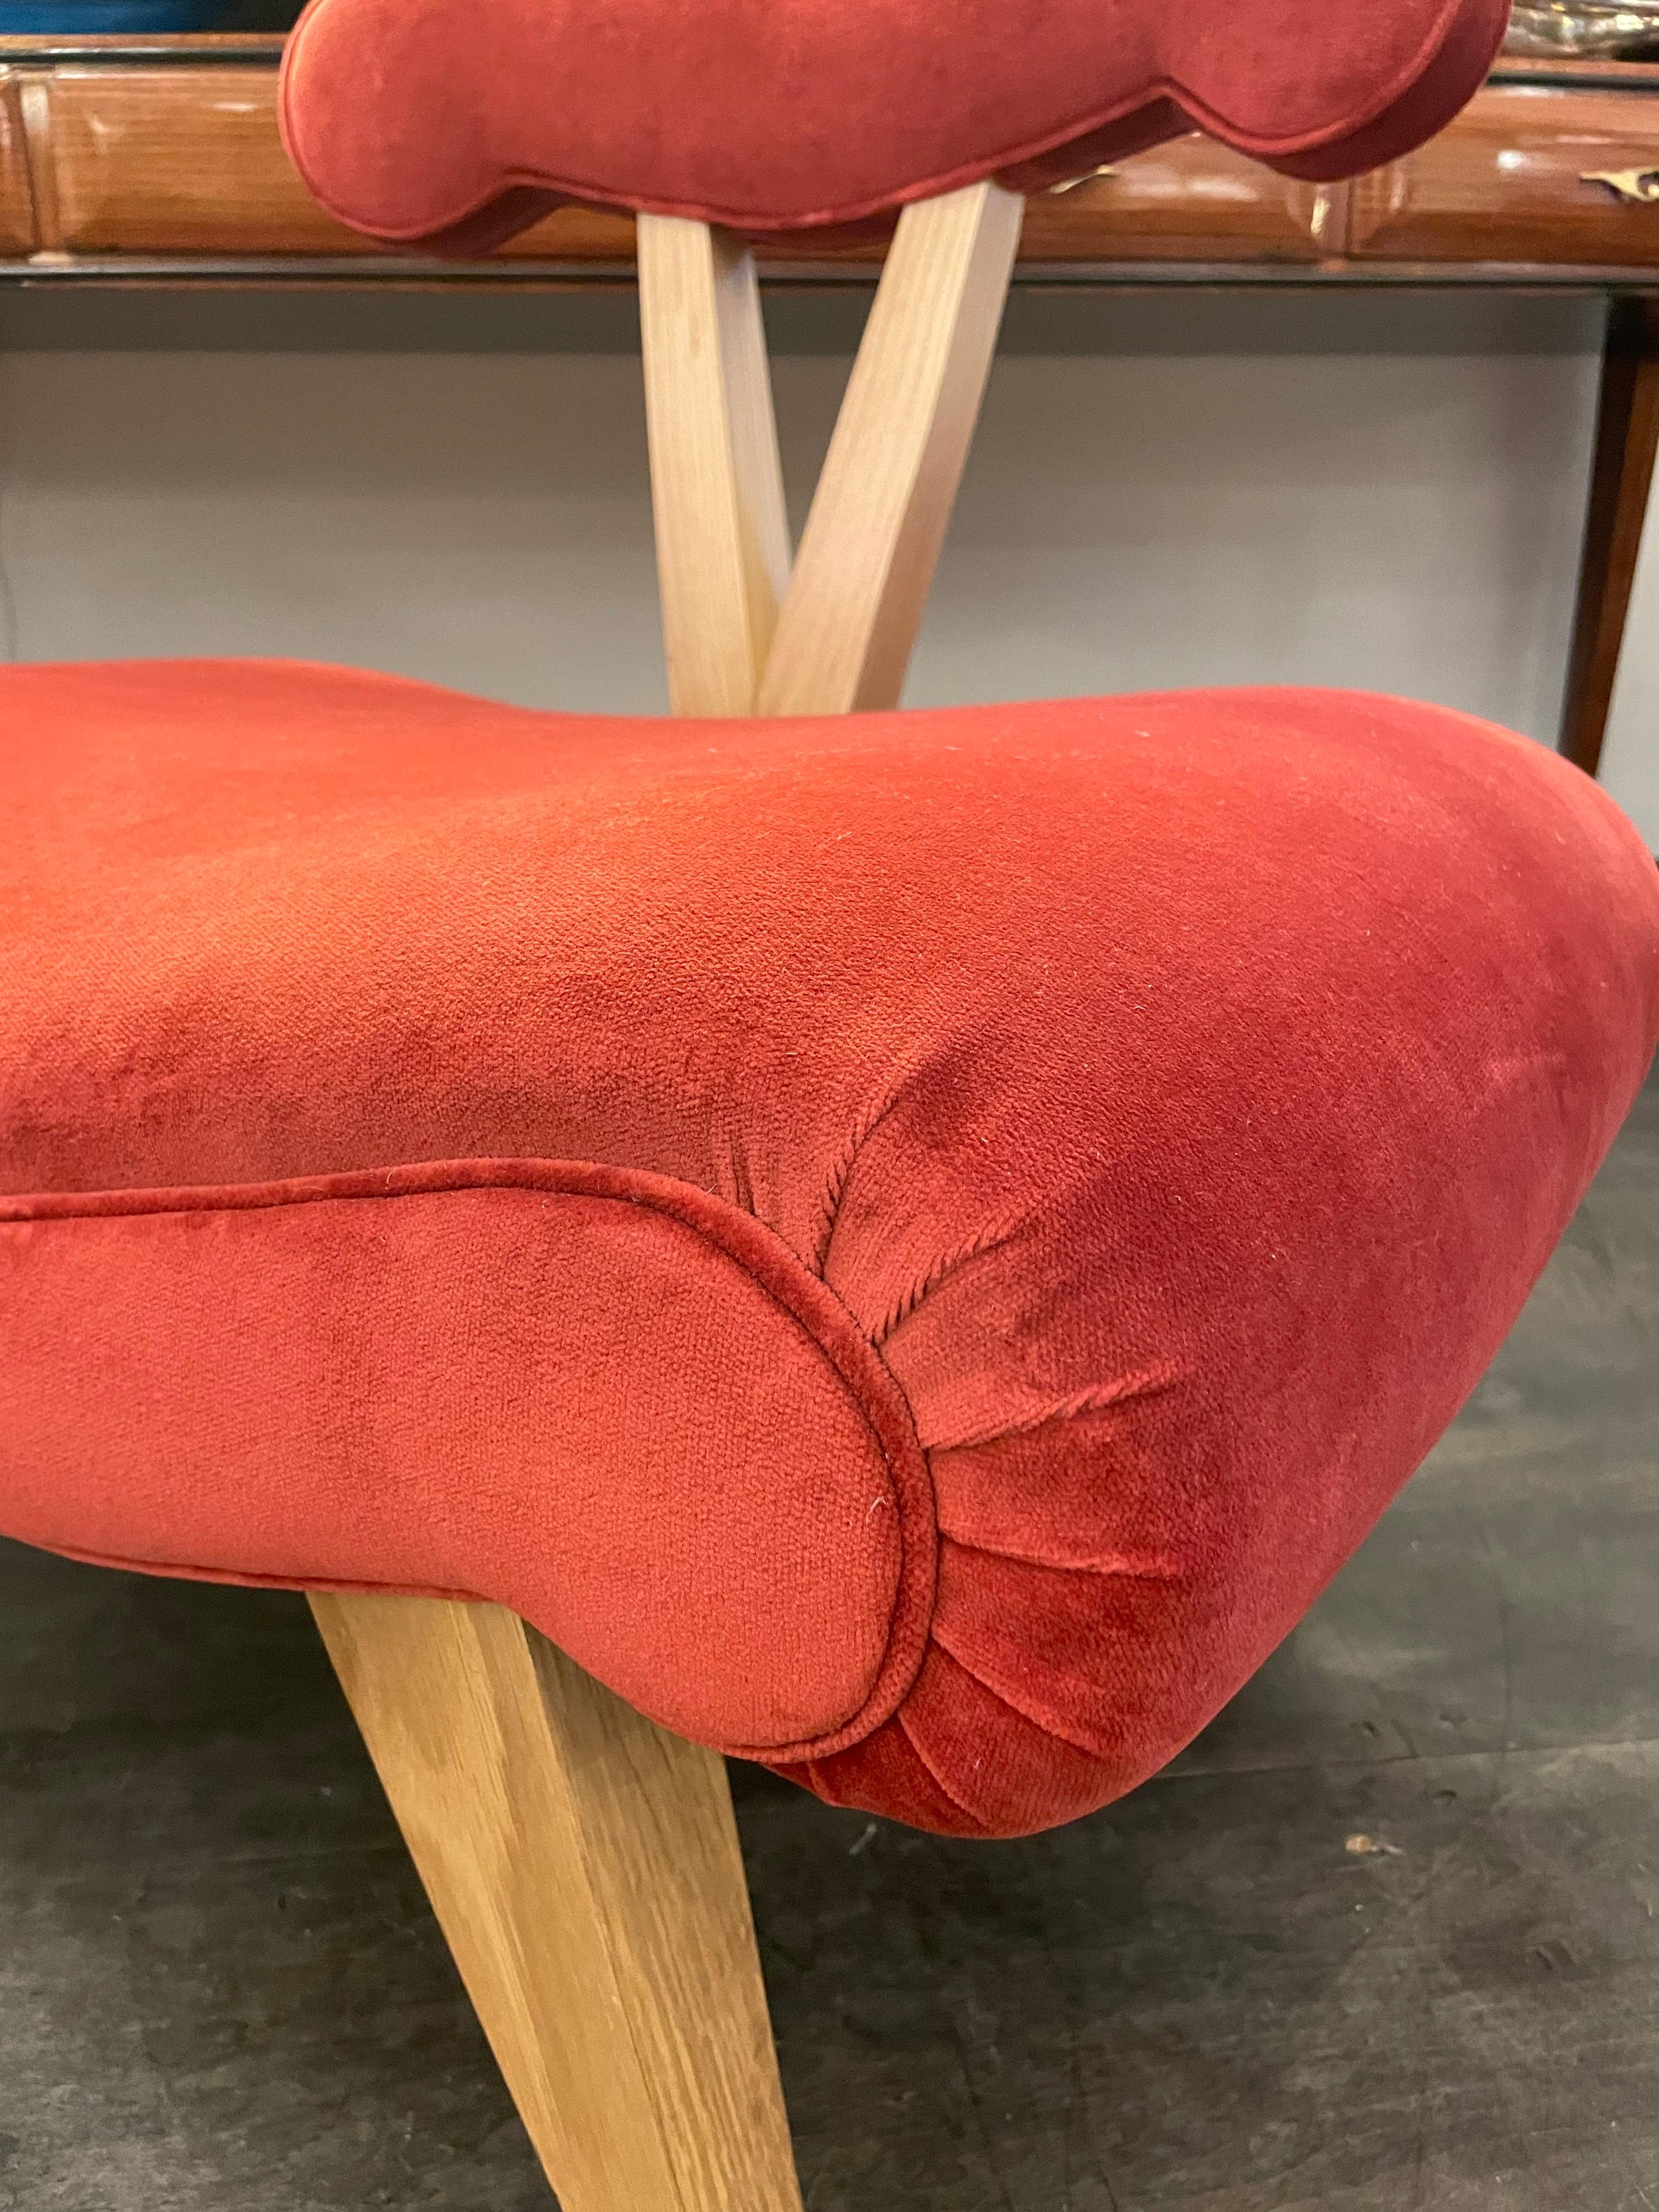 We have 4 of thee iconic Grosfeld House slipper chairs in the Hollywood Regency style, made later than the 1940's. In pristine, almost never used condition, in 4 different velvet colors, making a whimsical grouping. Priced and Sold individually -